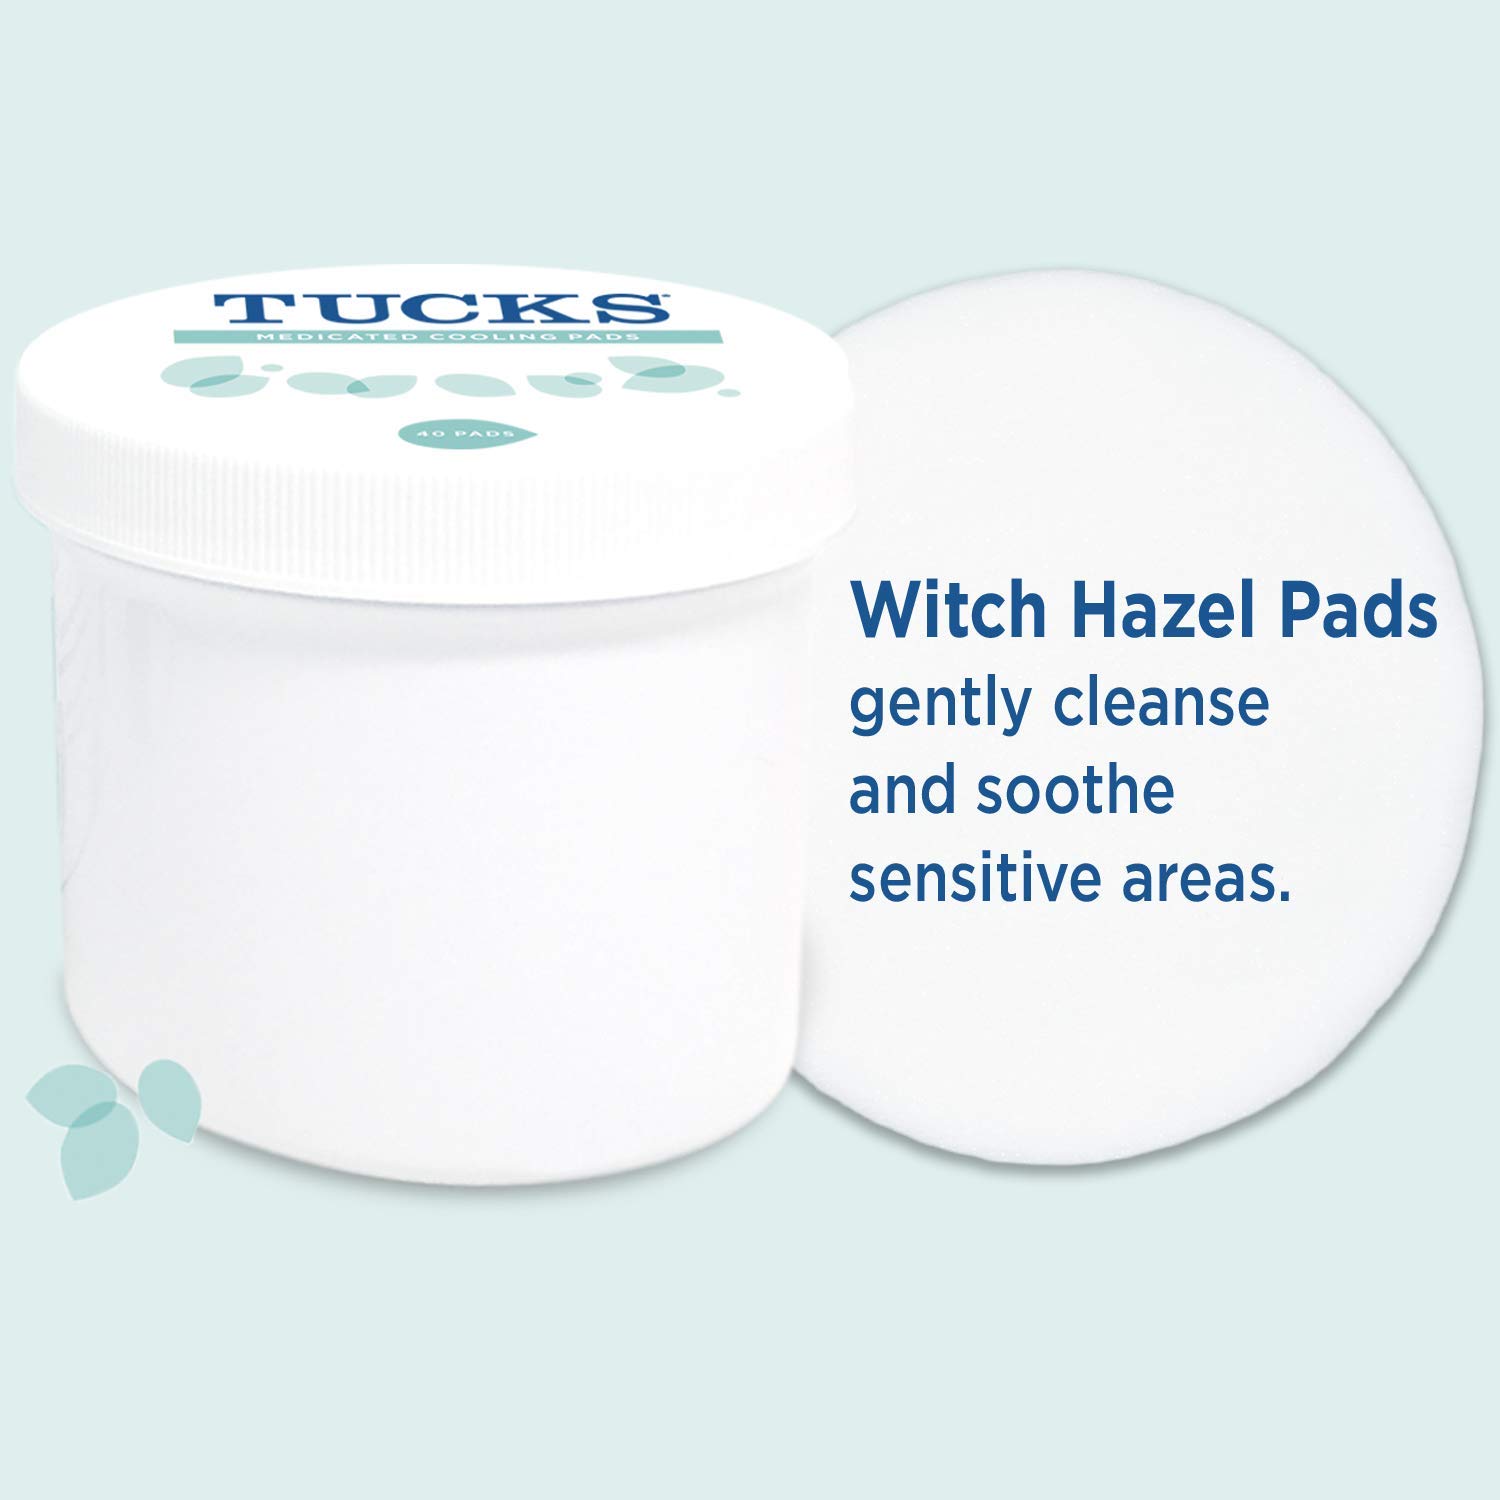 Tucks Multi-Care Relief Kit – 40 Count Witch Hazel Pads & 0.5 oz. Lidocaine Cream - Hemorrhoid Pads with Witch Hazel, Protects from Irritation, Hemorrhoid Treatment, Medicated Pads Used by Hospitals